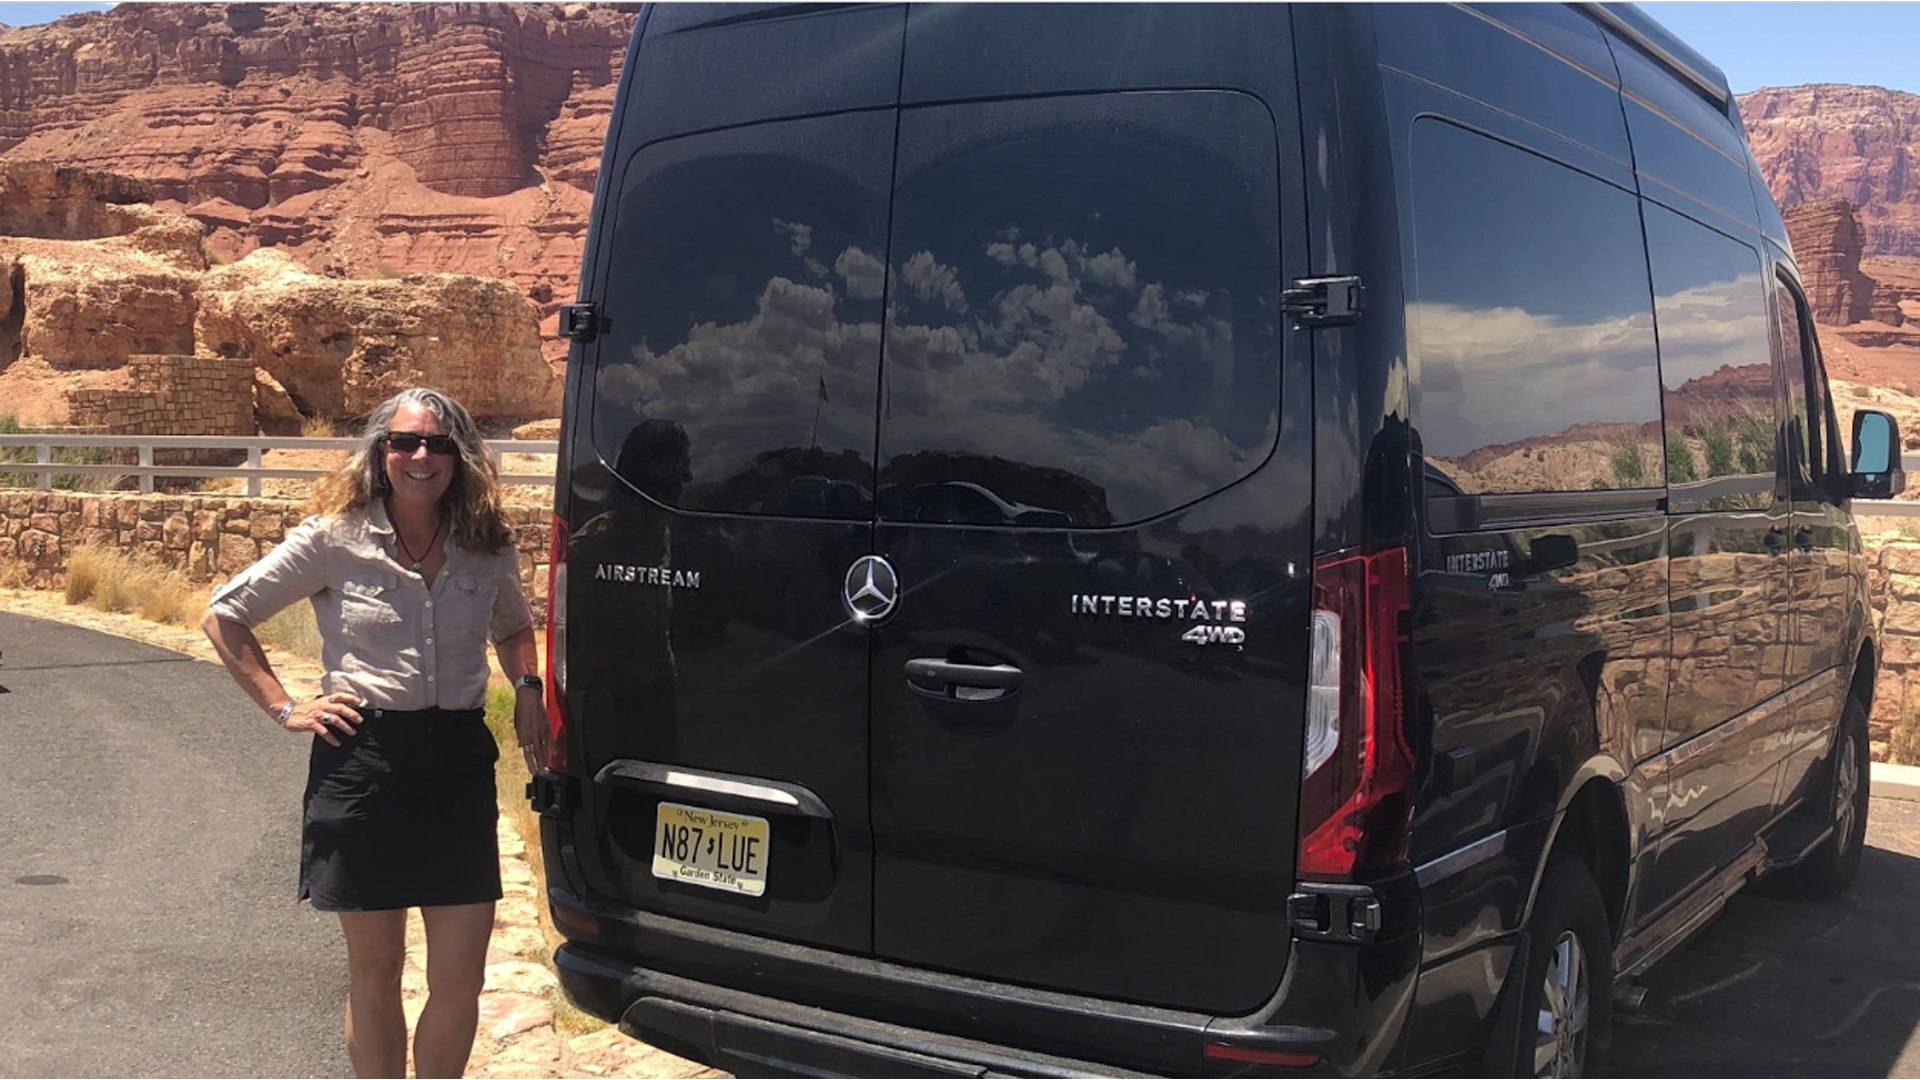 Christine Miller standing next to her black Airstream 19 Class B Motorhome that is parked in the desert.